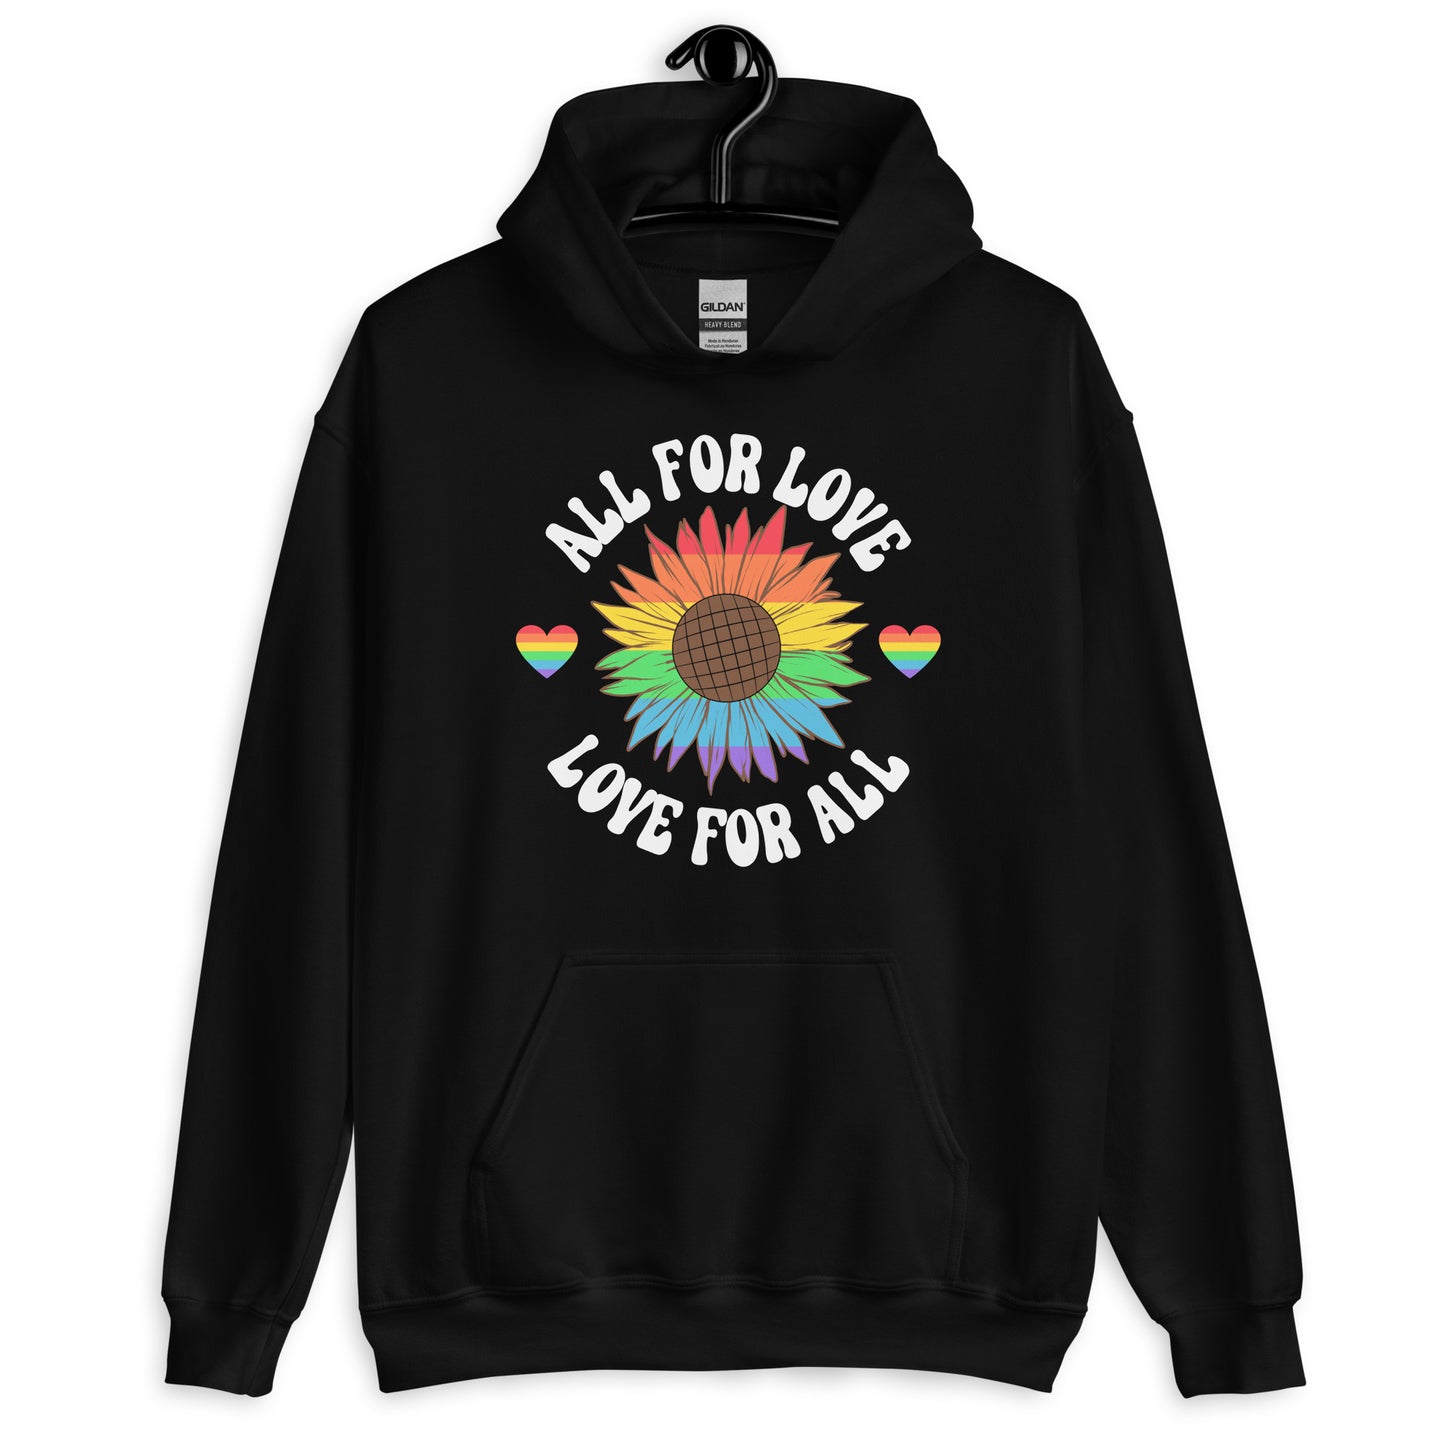 All For Love Love For All Gay Pride Hoodie - gay pride apparel